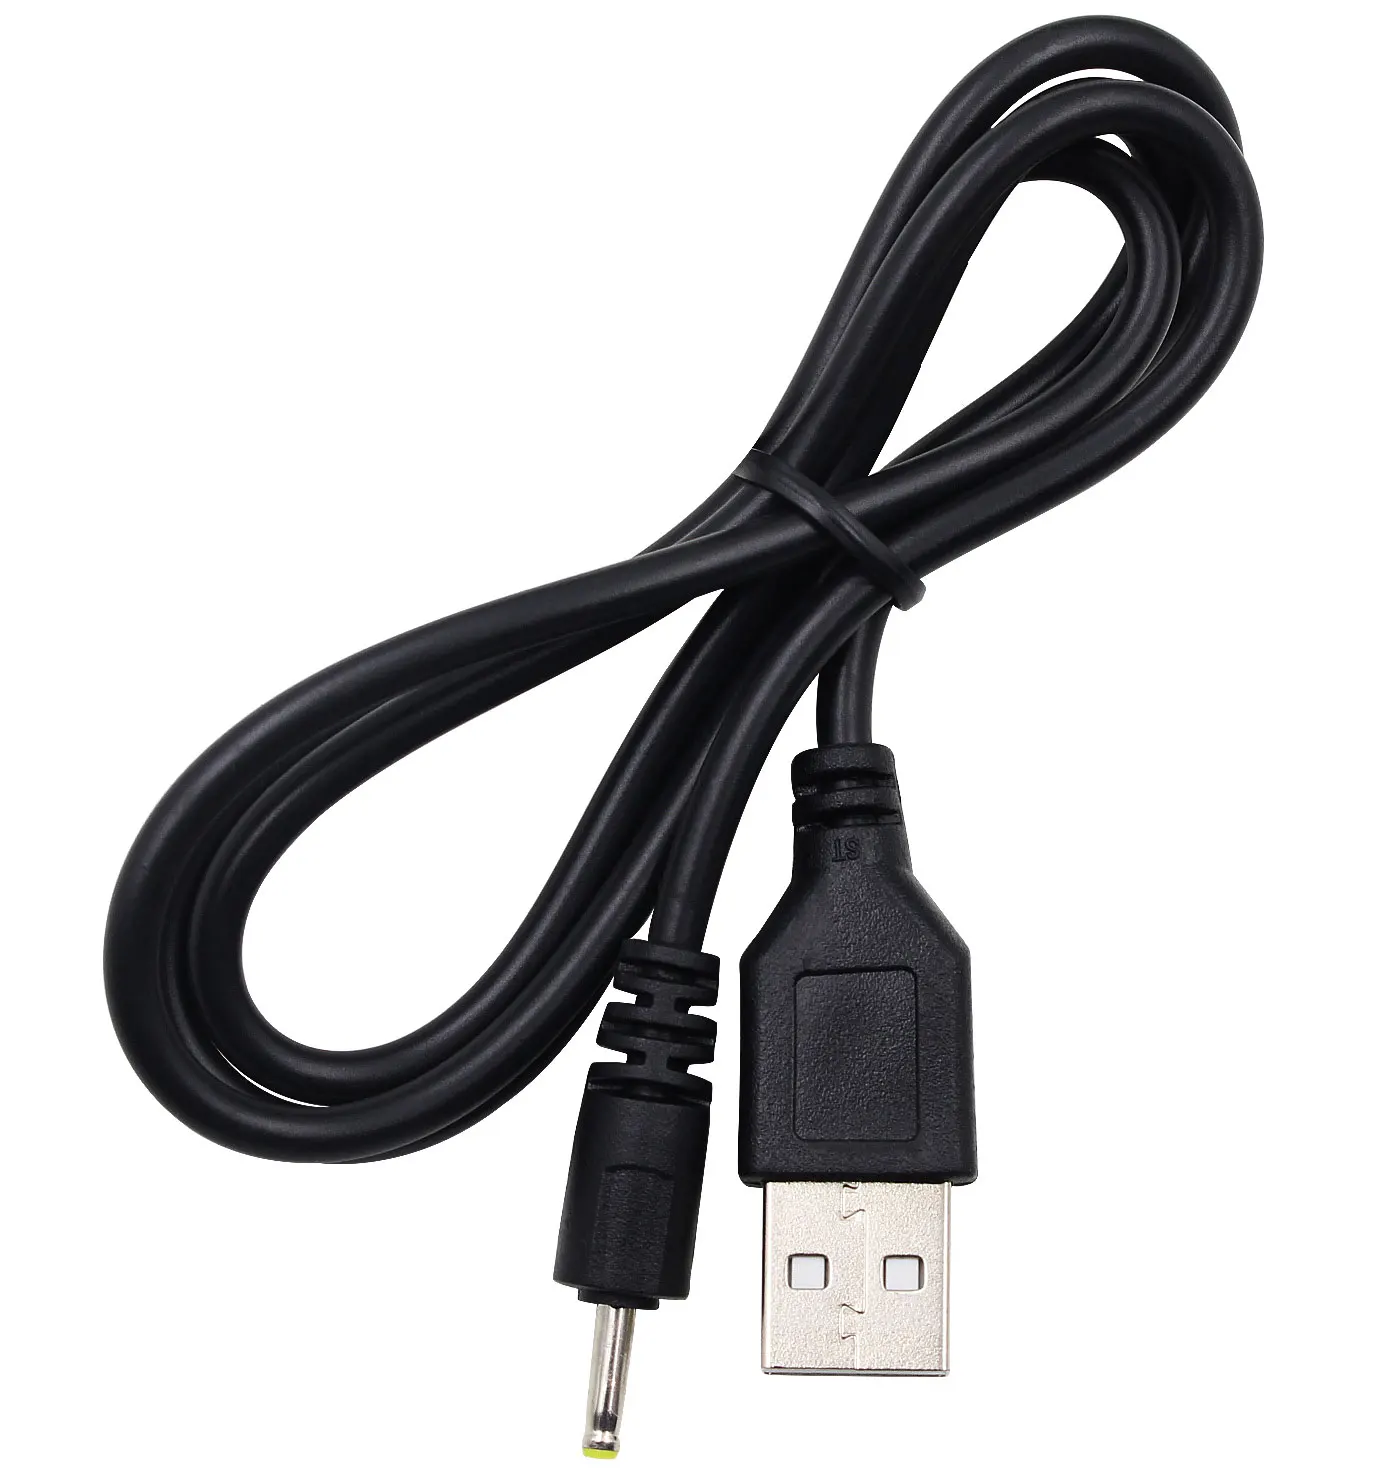 USB 5V DC Adaptor Charger Cable for Lexibook Tablet Junior Power Touch MFC270EN 